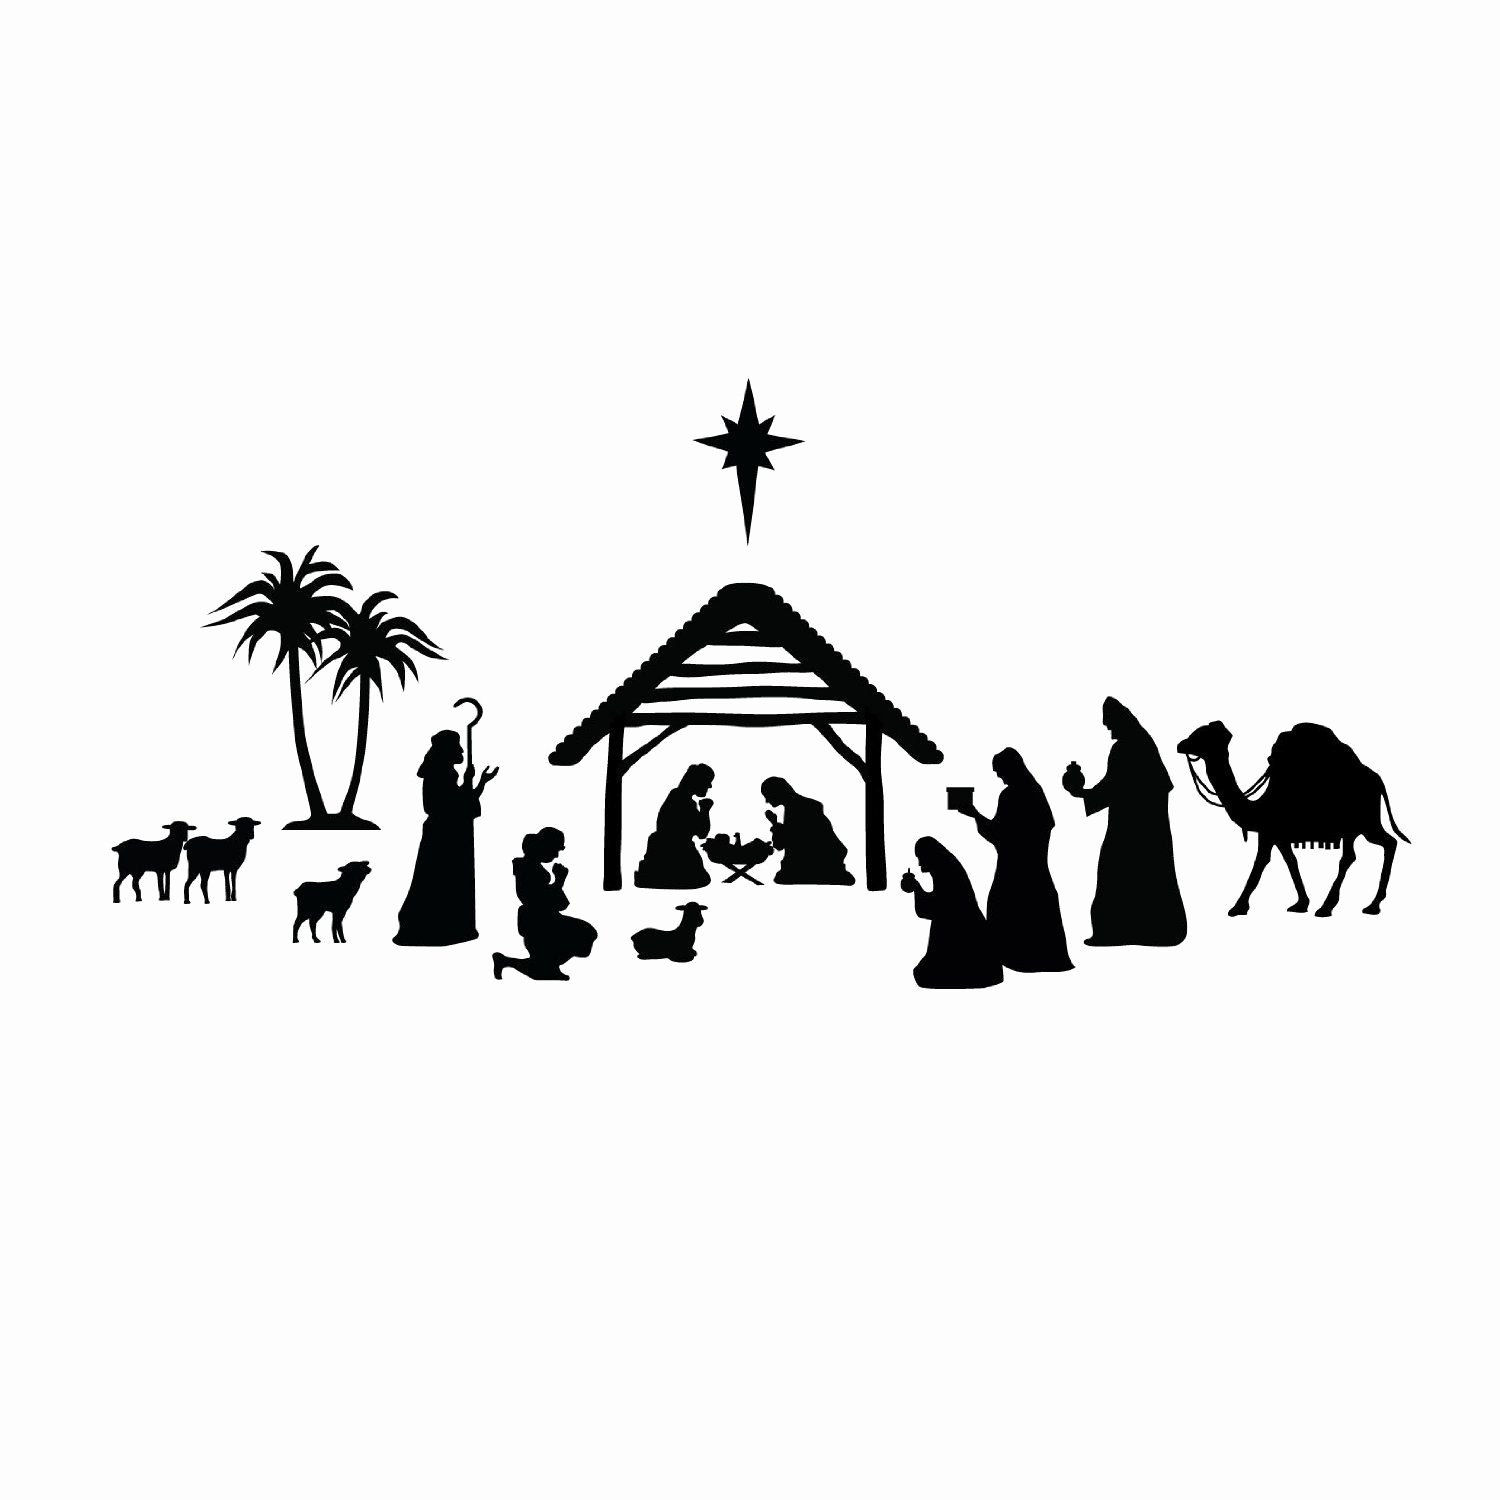 Nativity Scene Silhouette Pattern Free Lovely Related Image Neat Diy Christmas Gifts